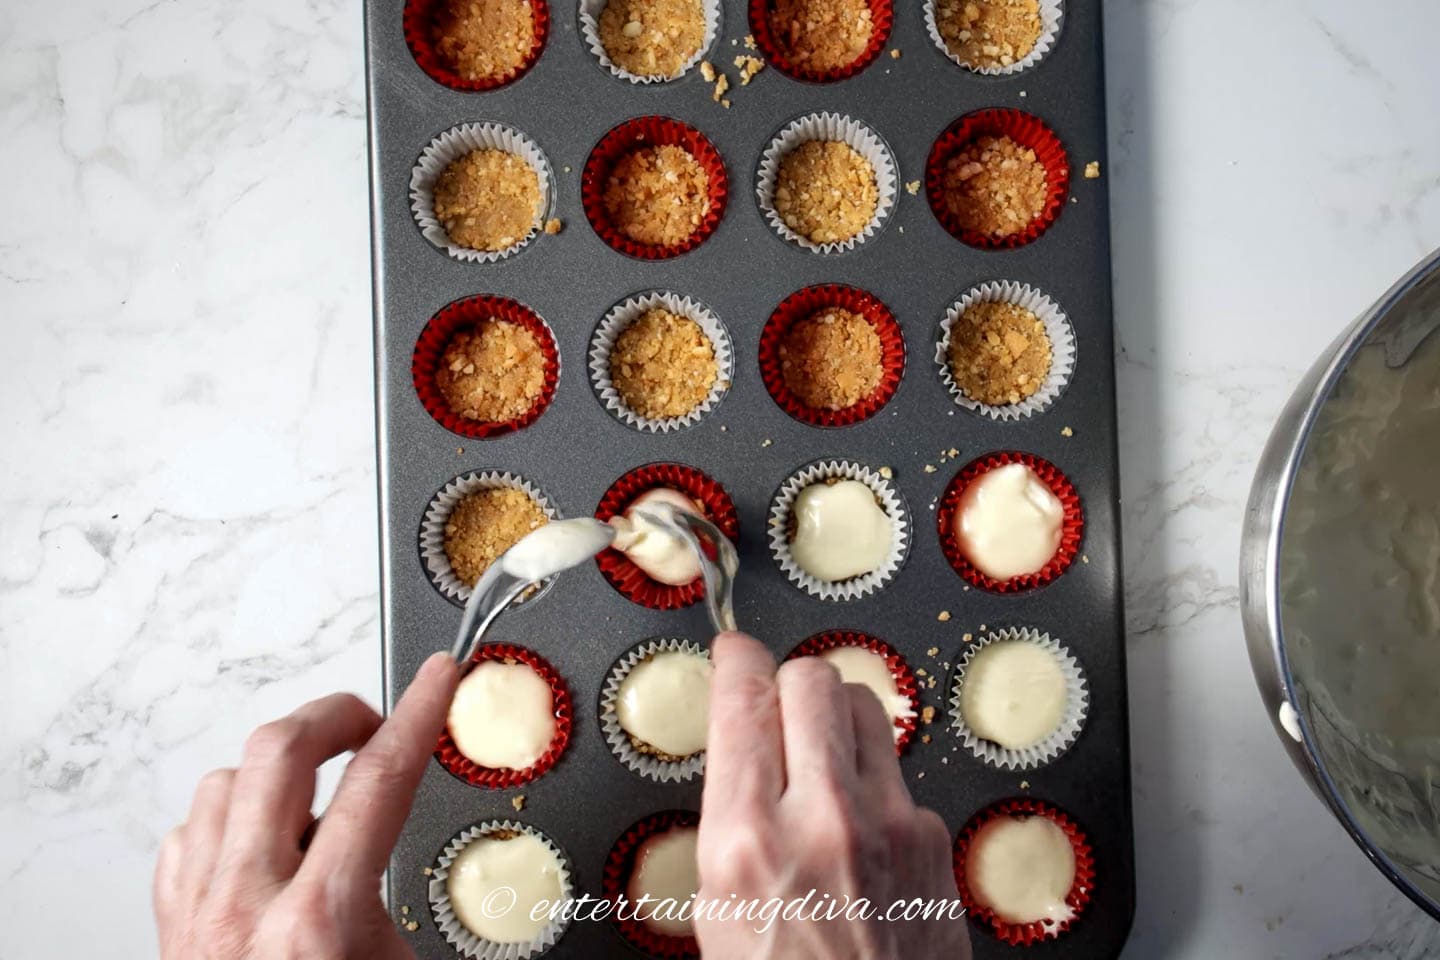 Fill mini cupcake liners with cheesecake batter